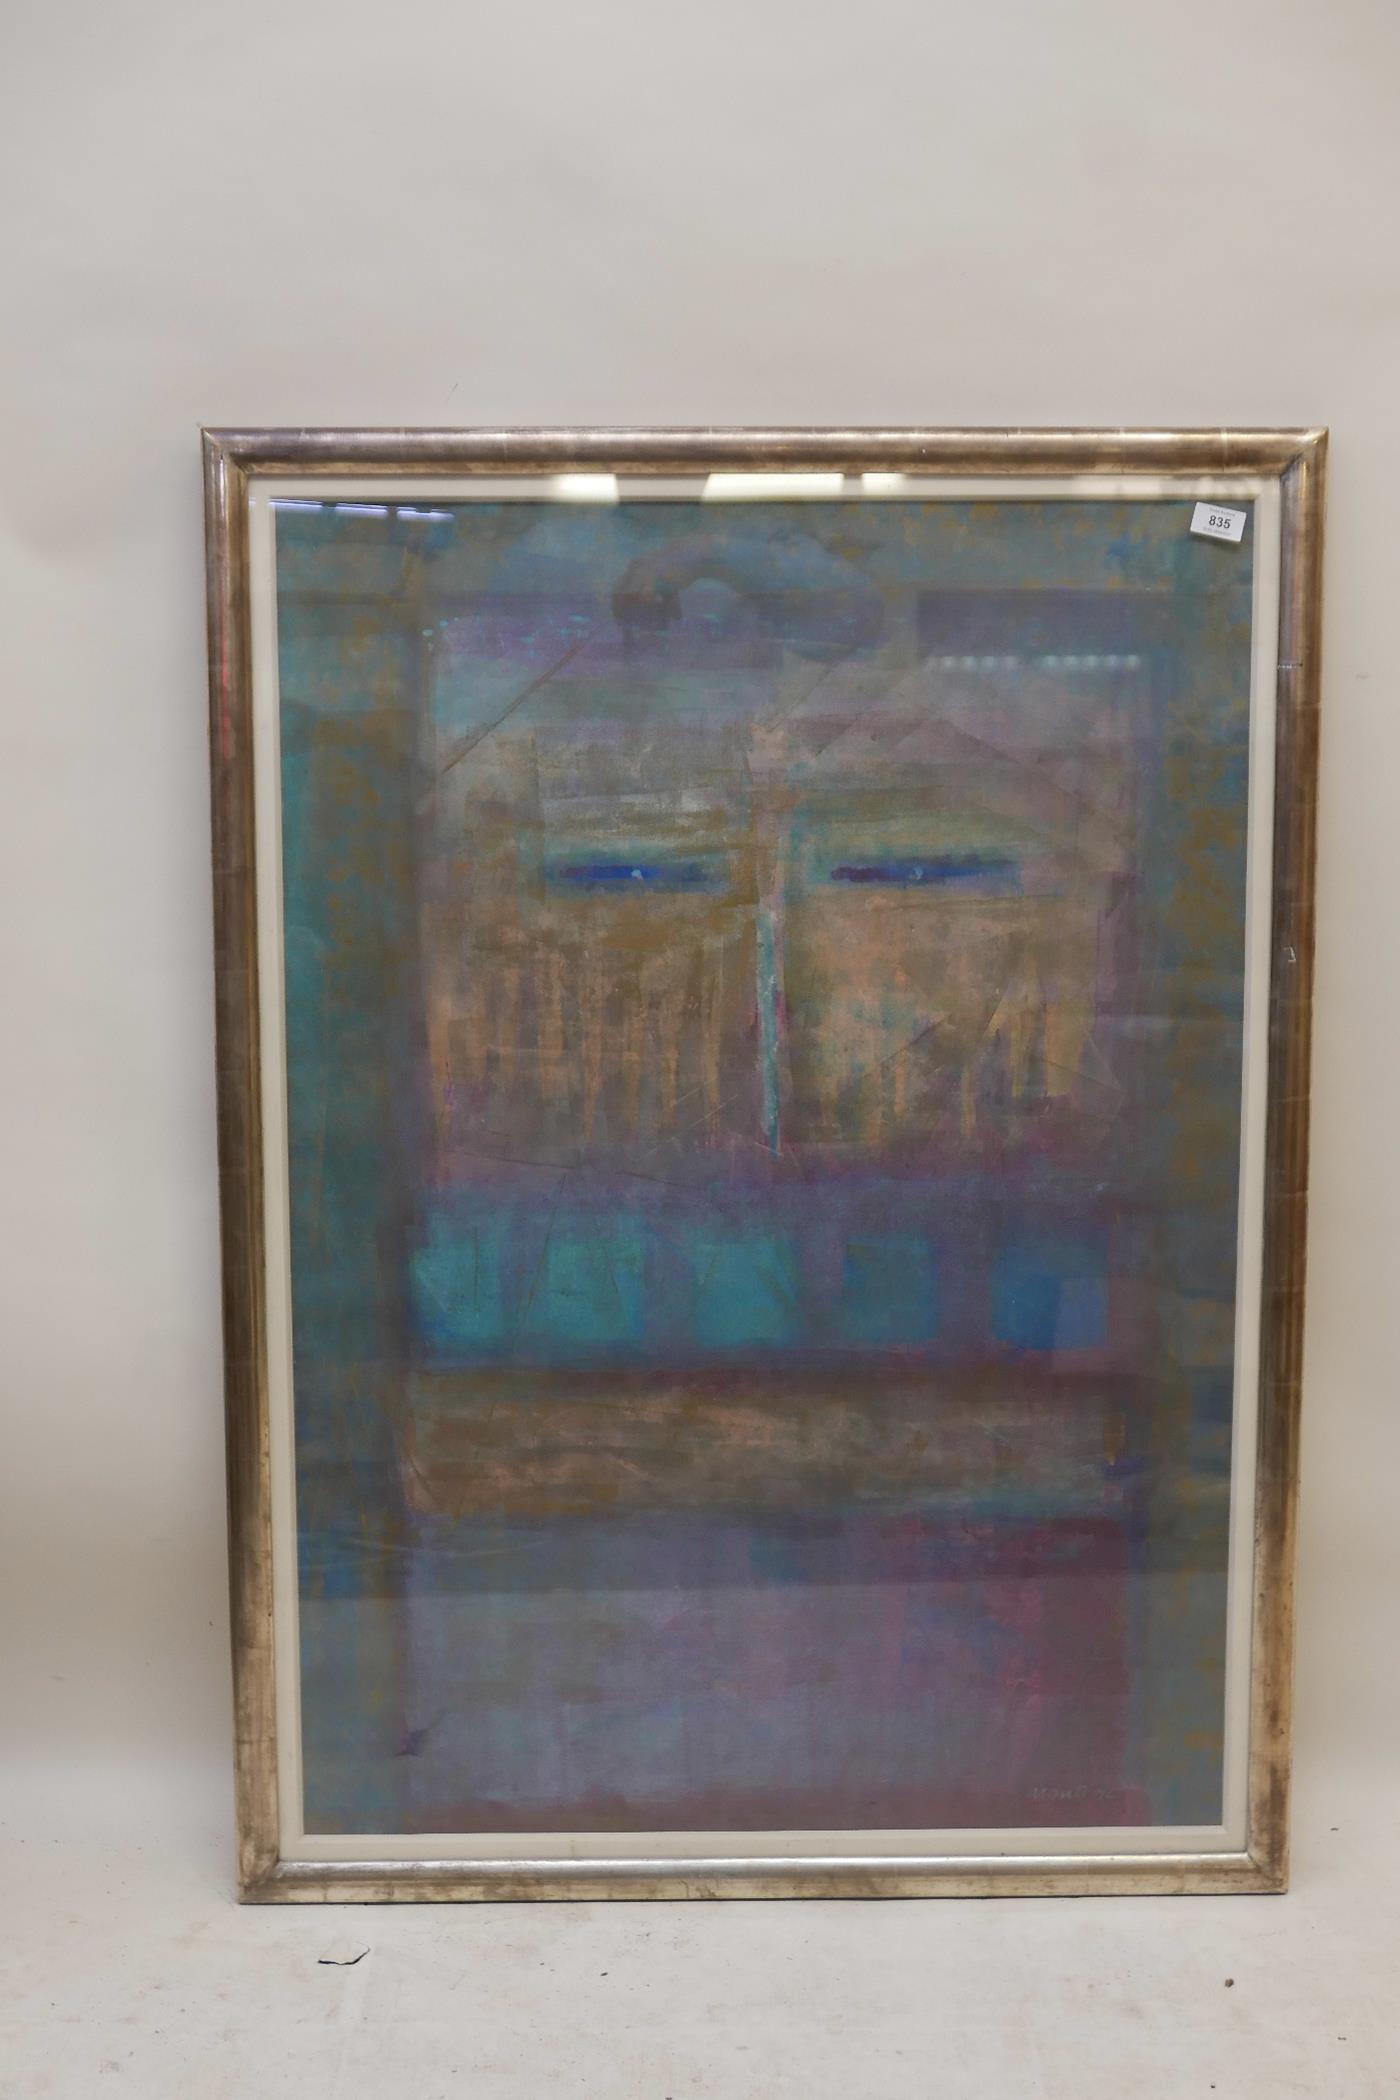 Abstract, mixed media on paper, framed by Academy framing at the Royal Academy, signed Monti '92, in - Image 4 of 4